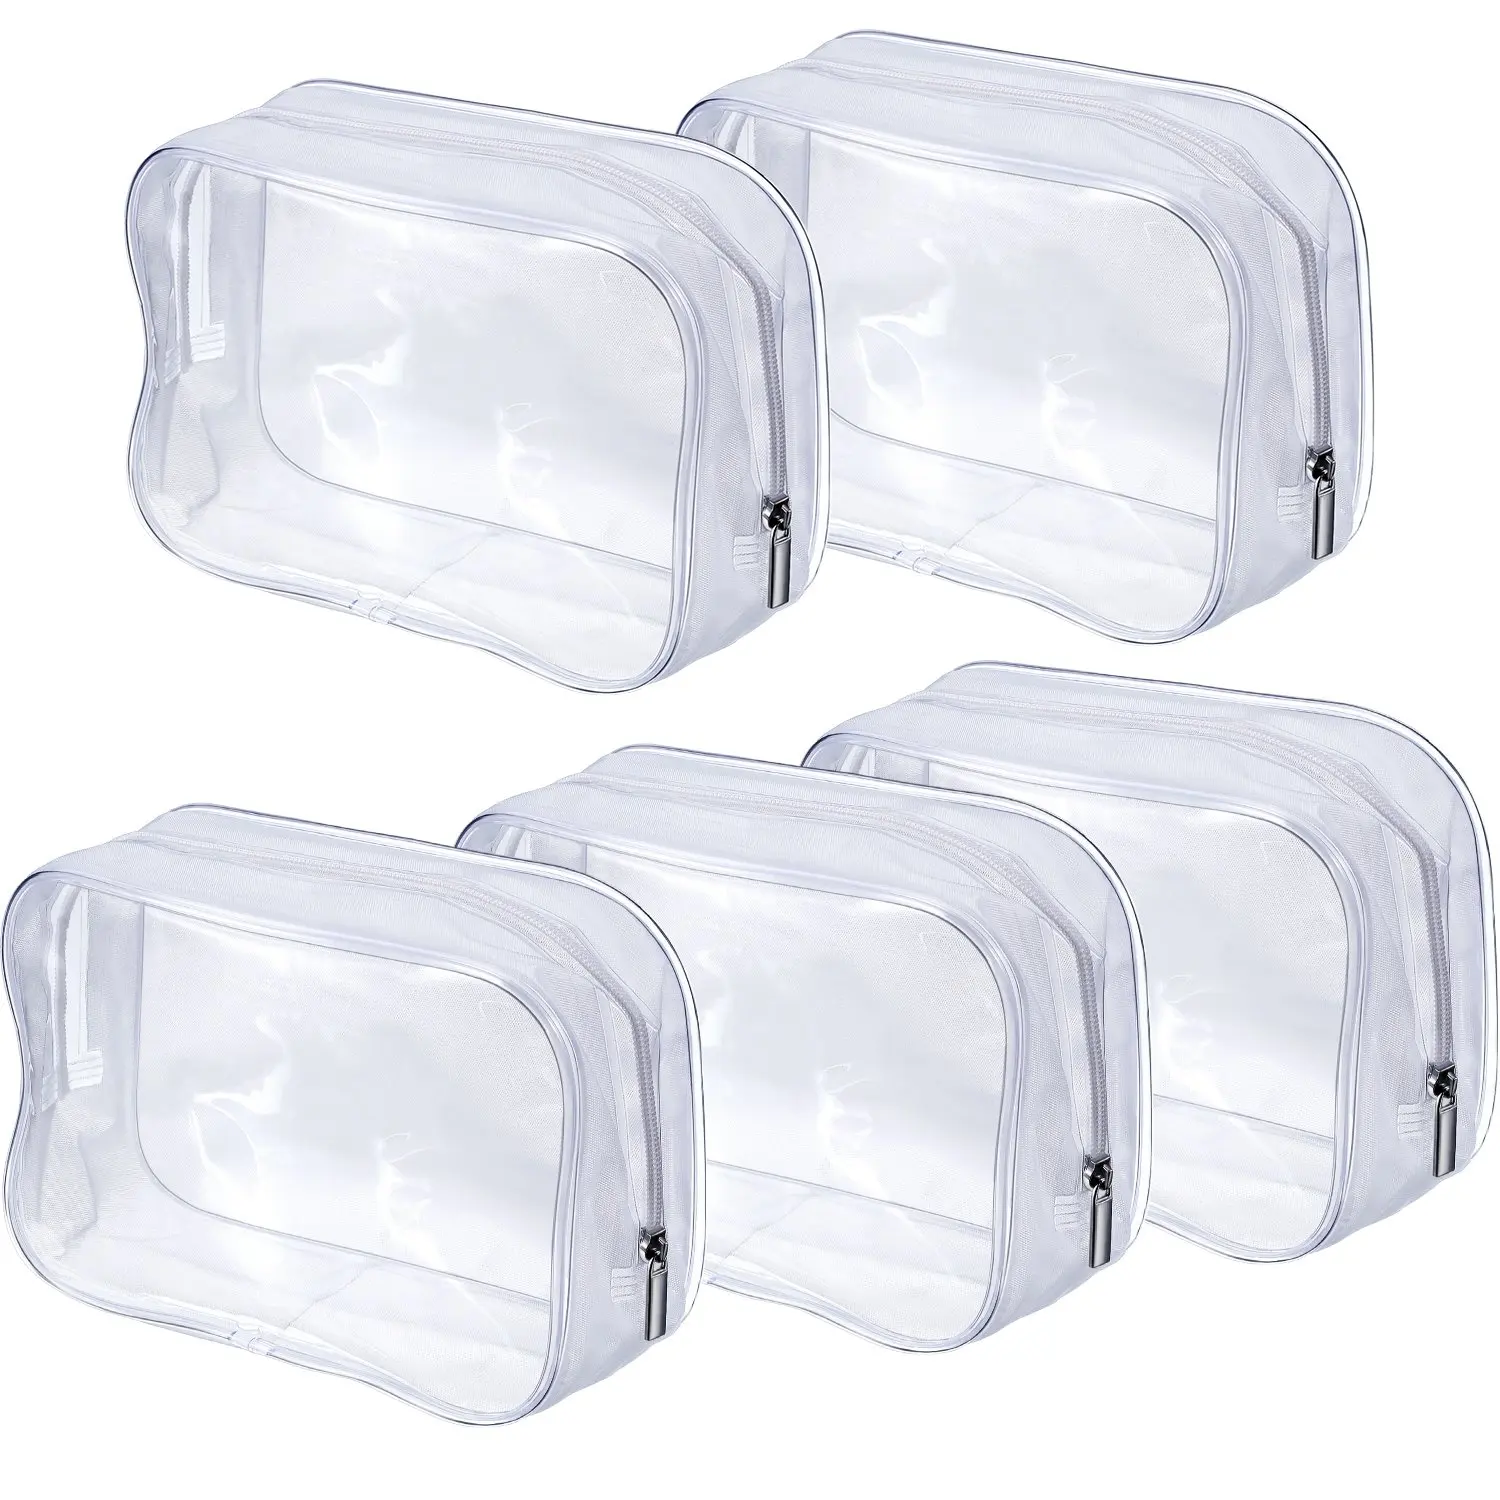 JIAKAI 12pcs Mini Small PVC Transparent Plastic Cosmetic Organizer Bag  Pouch With Zipper Closure for Vacation Travel, Bathroom and Organizing  Makeup